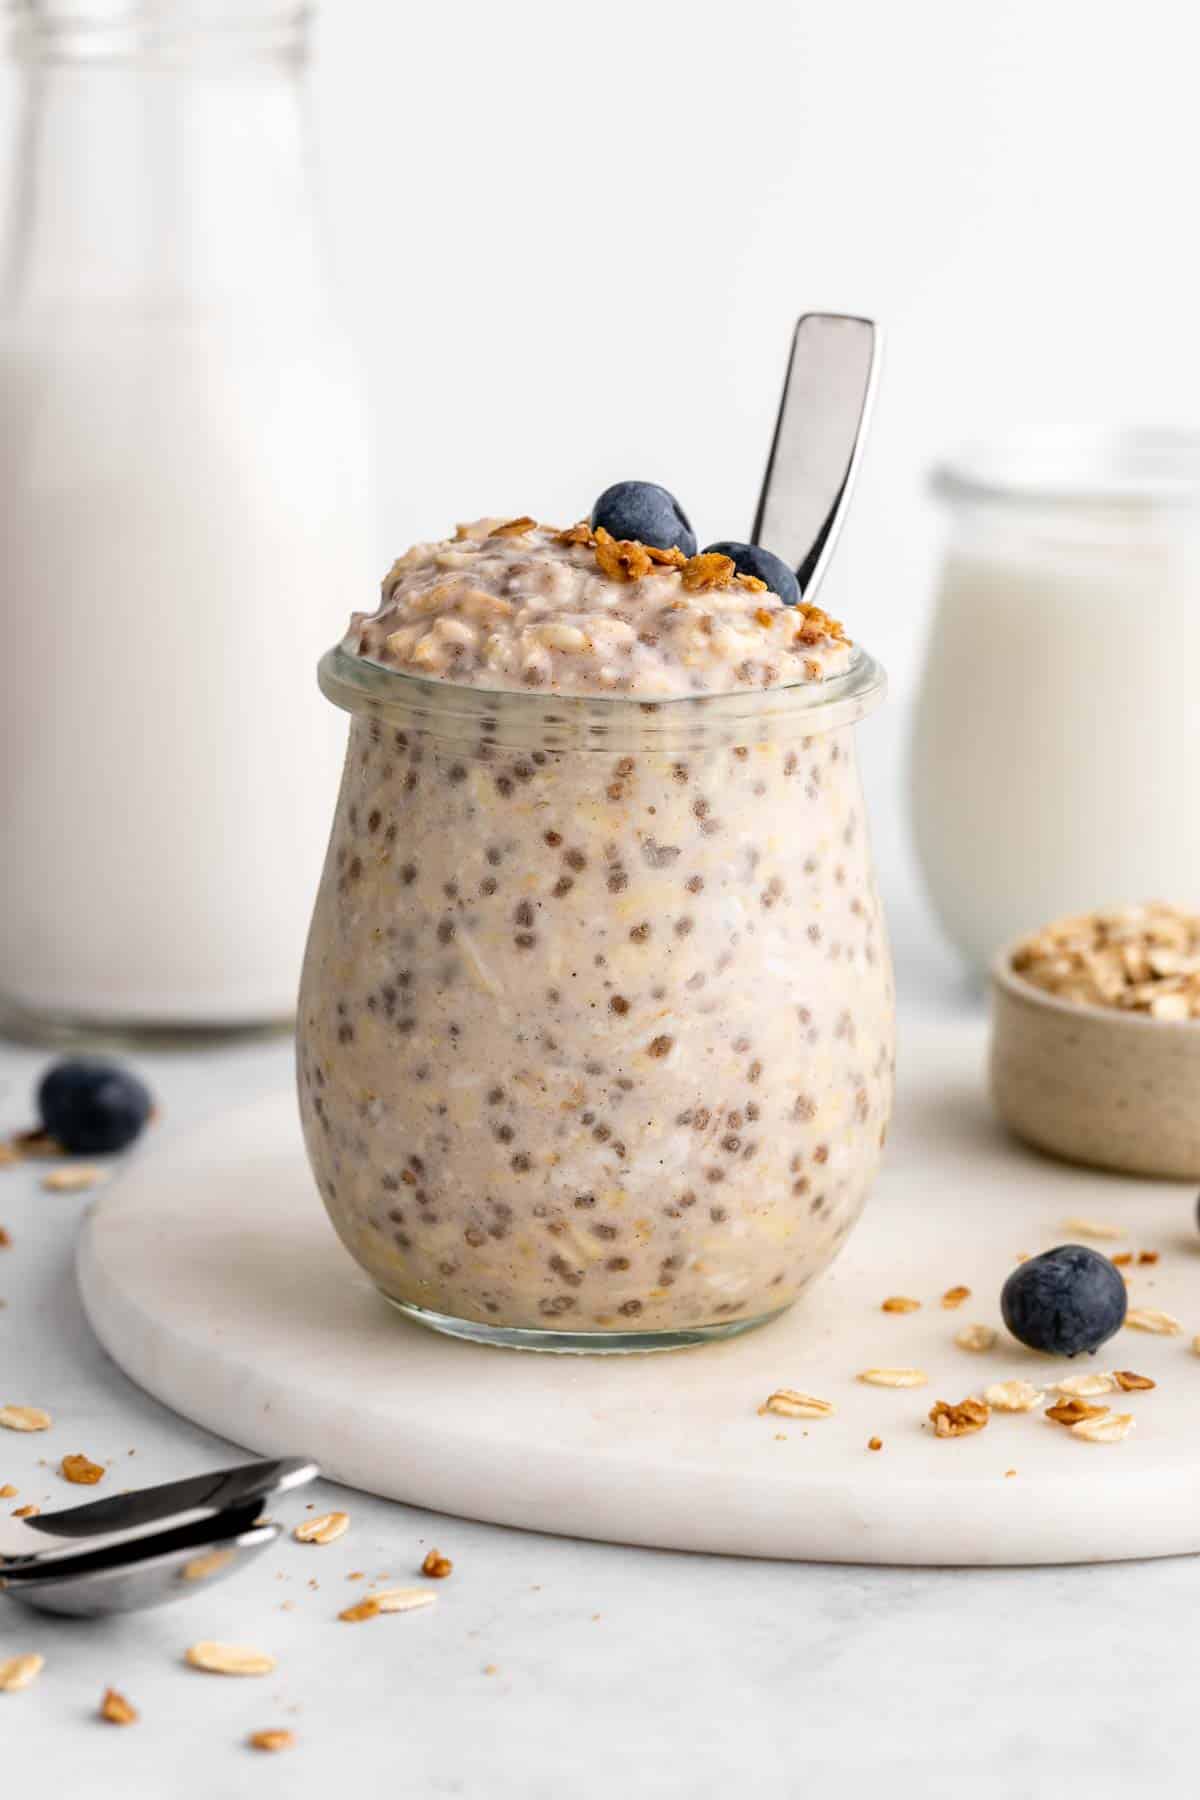 vegan basic overnight oats in a jar with chia seeds, almond milk, and rolled oats